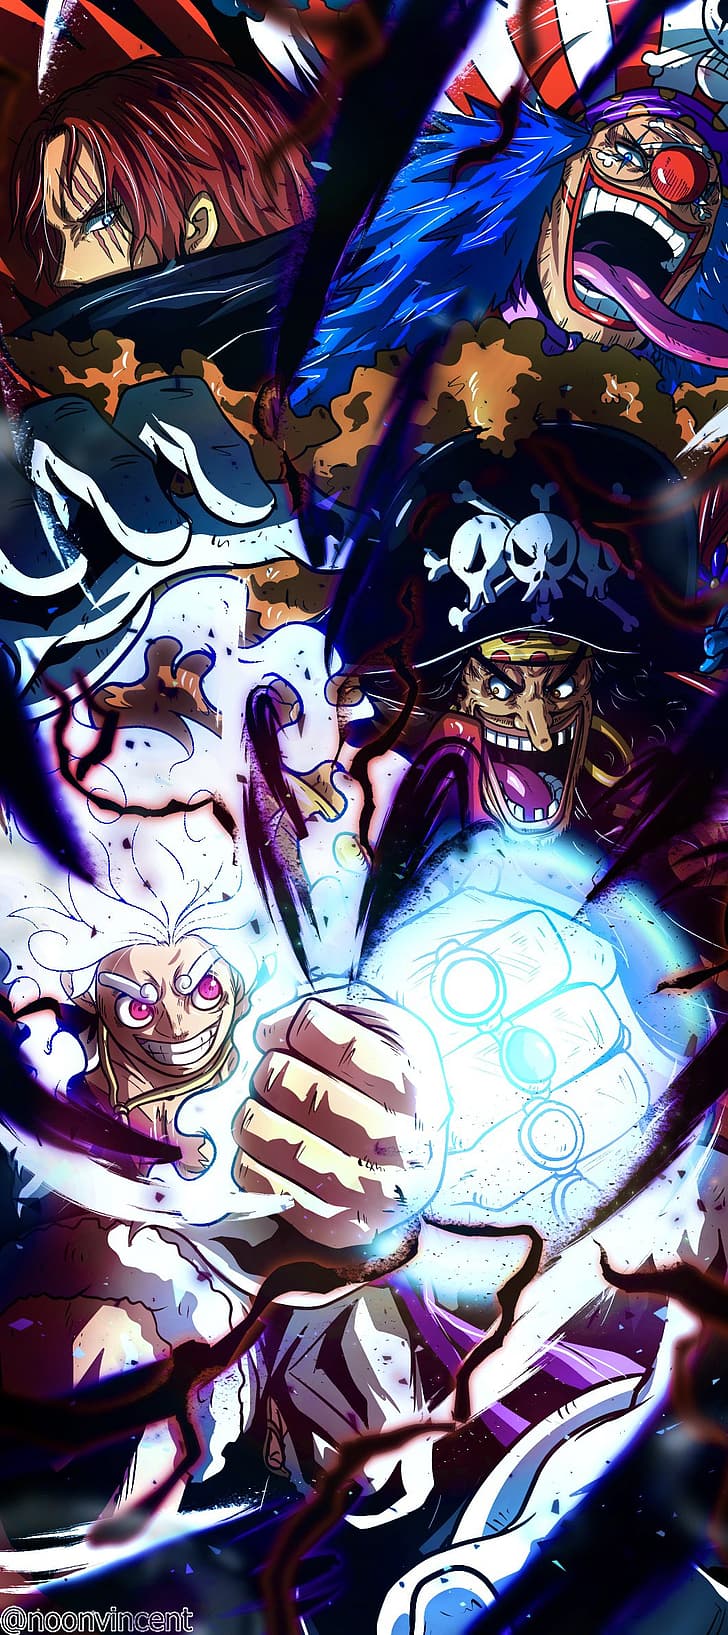 One Piece, vincentnoon, Monkey D. Luffy, Gear 5th, marshall d. teach, Shanks, Buggy (One Piece), HD wallpaper